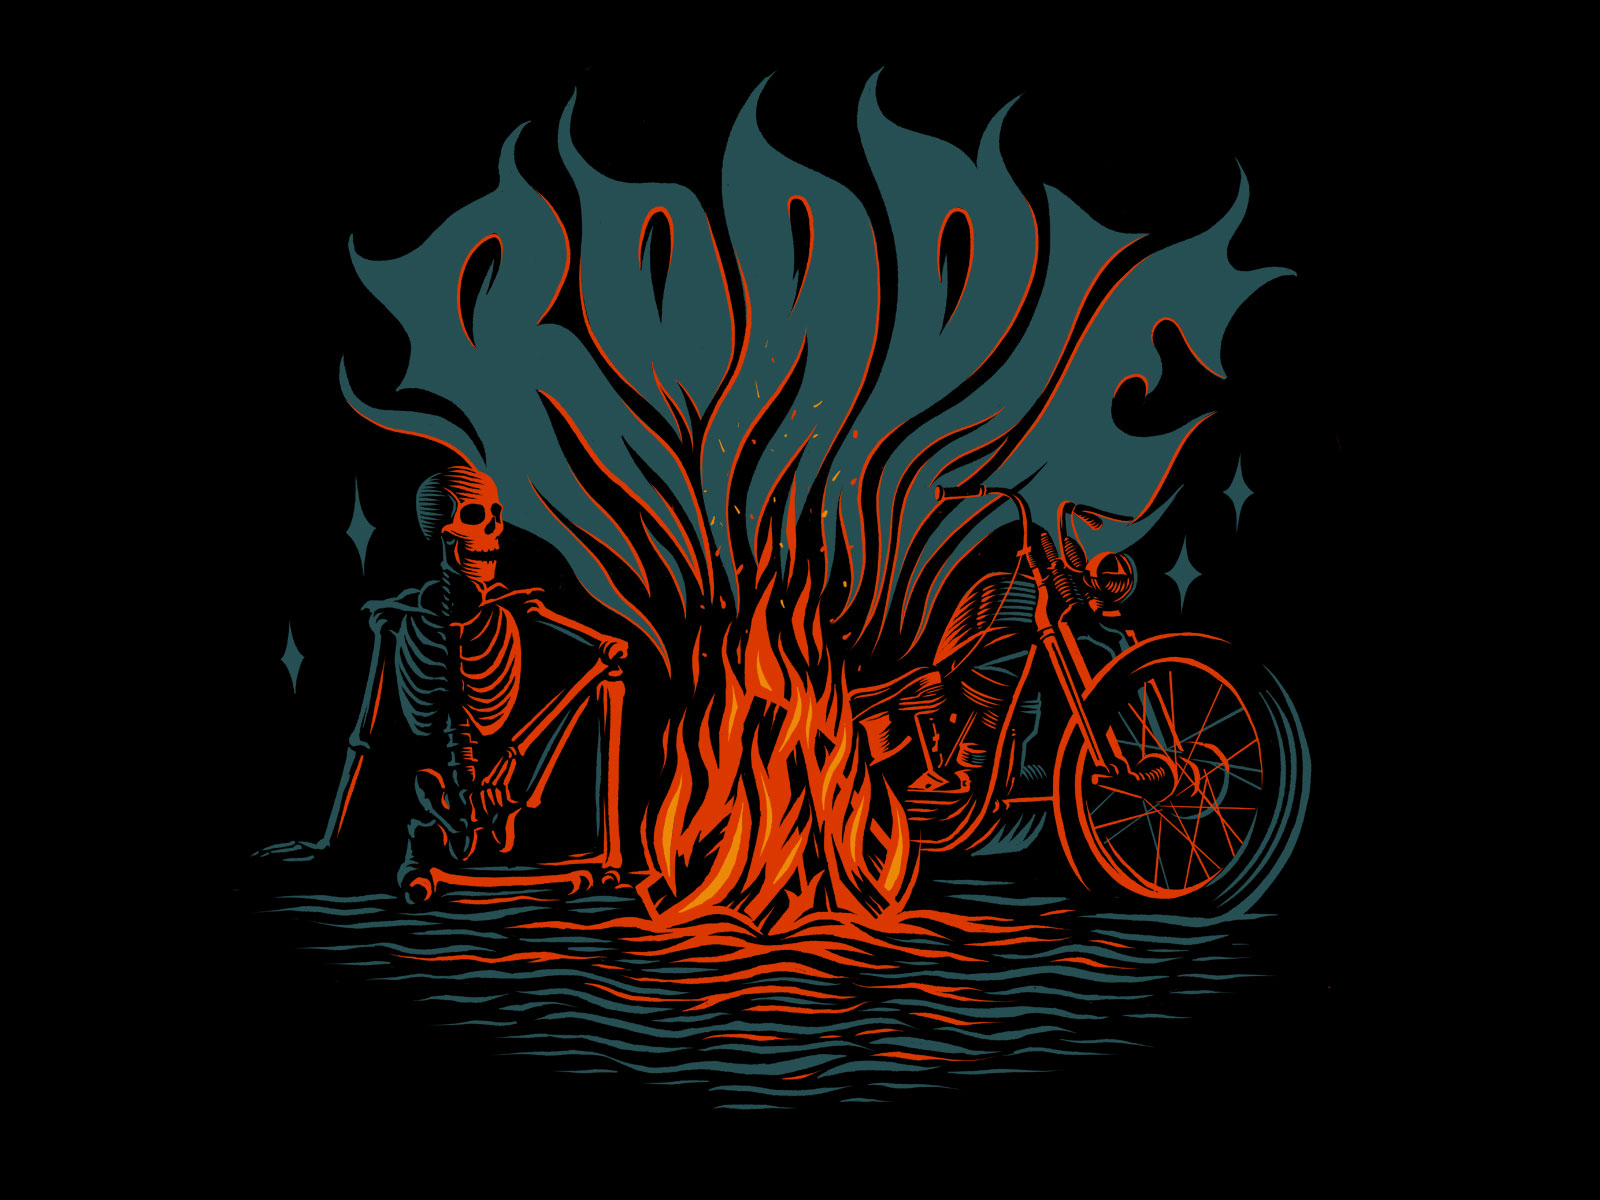 Roadie Brand Apparel Design by Chad Patterson on Dribbble